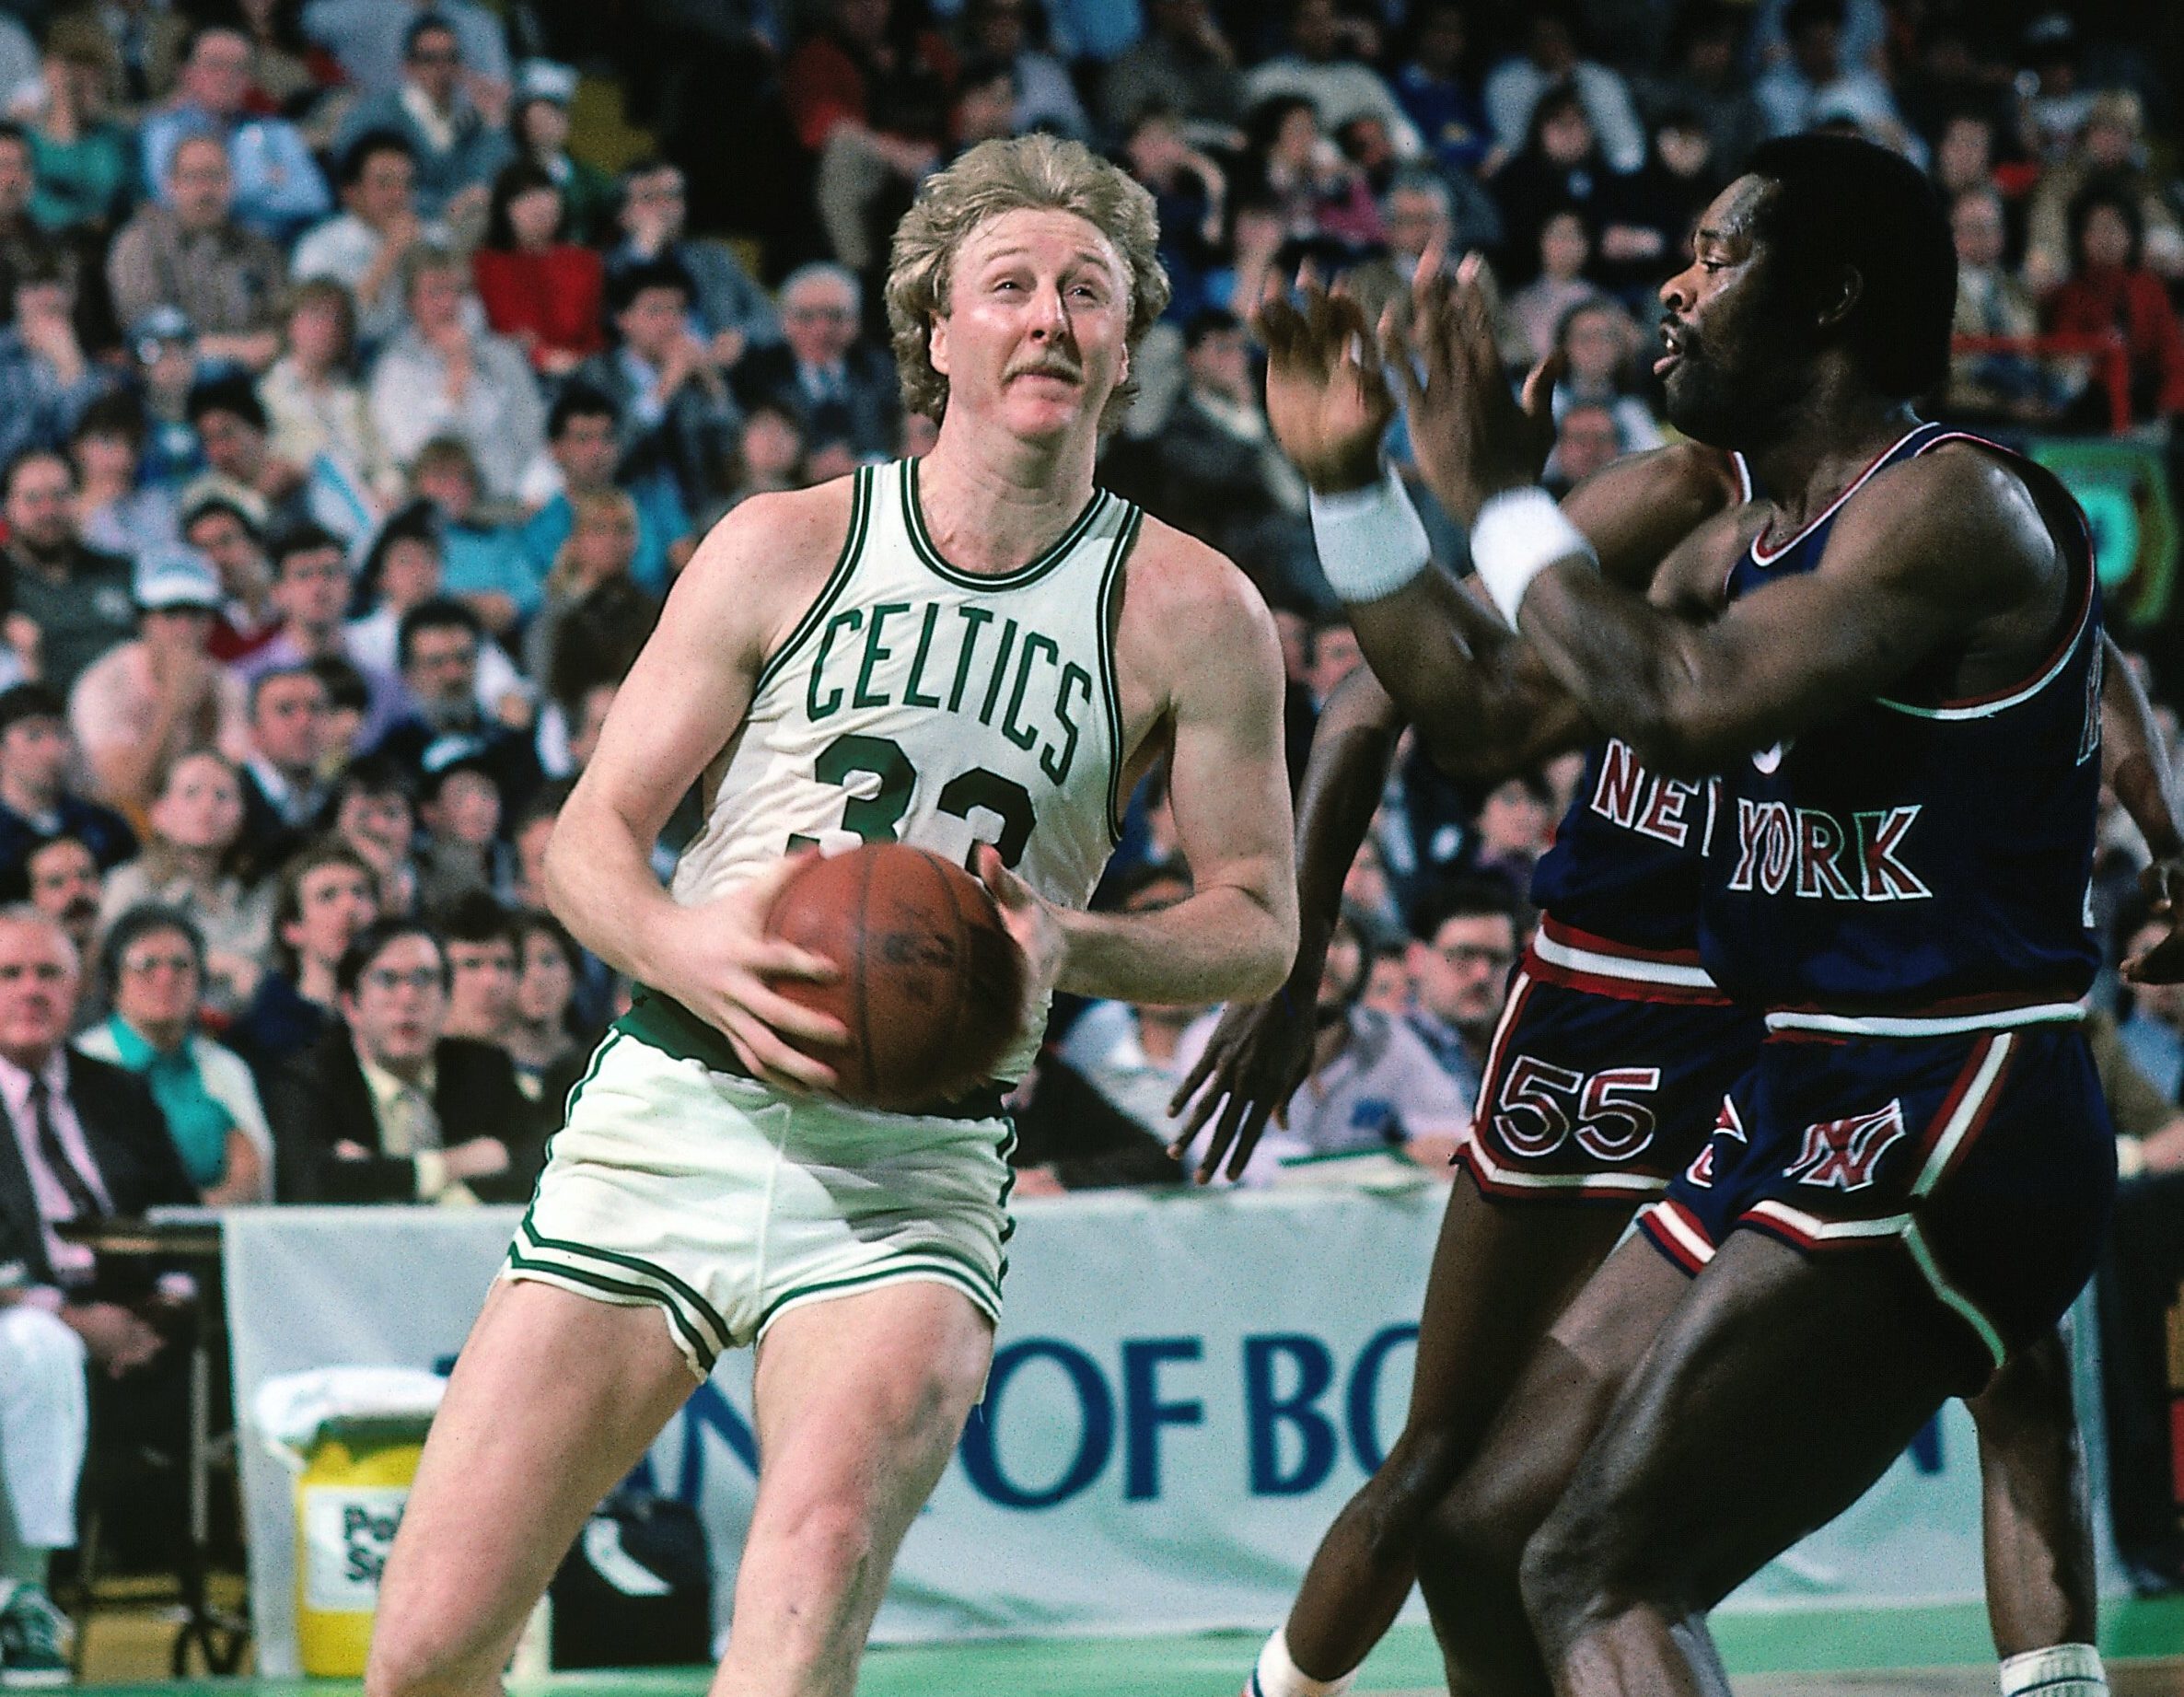 BOSTON - 1983: Larry Bird #33 of the Boston Celtics drives to the basket against the New York Knicks during a game played in 1983 at the Boston Garden in Boston, Massachusetts. NOTE TO USER: User expressly acknowledges and agrees that, by downloading and or using this photograph, User is consenting to the terms and conditions of the Getty Images License Agreement. Mandatory Copyright Notice: Copyright 1983 NBAE (Photo by Dick Raphael/NBAE via Getty Images)